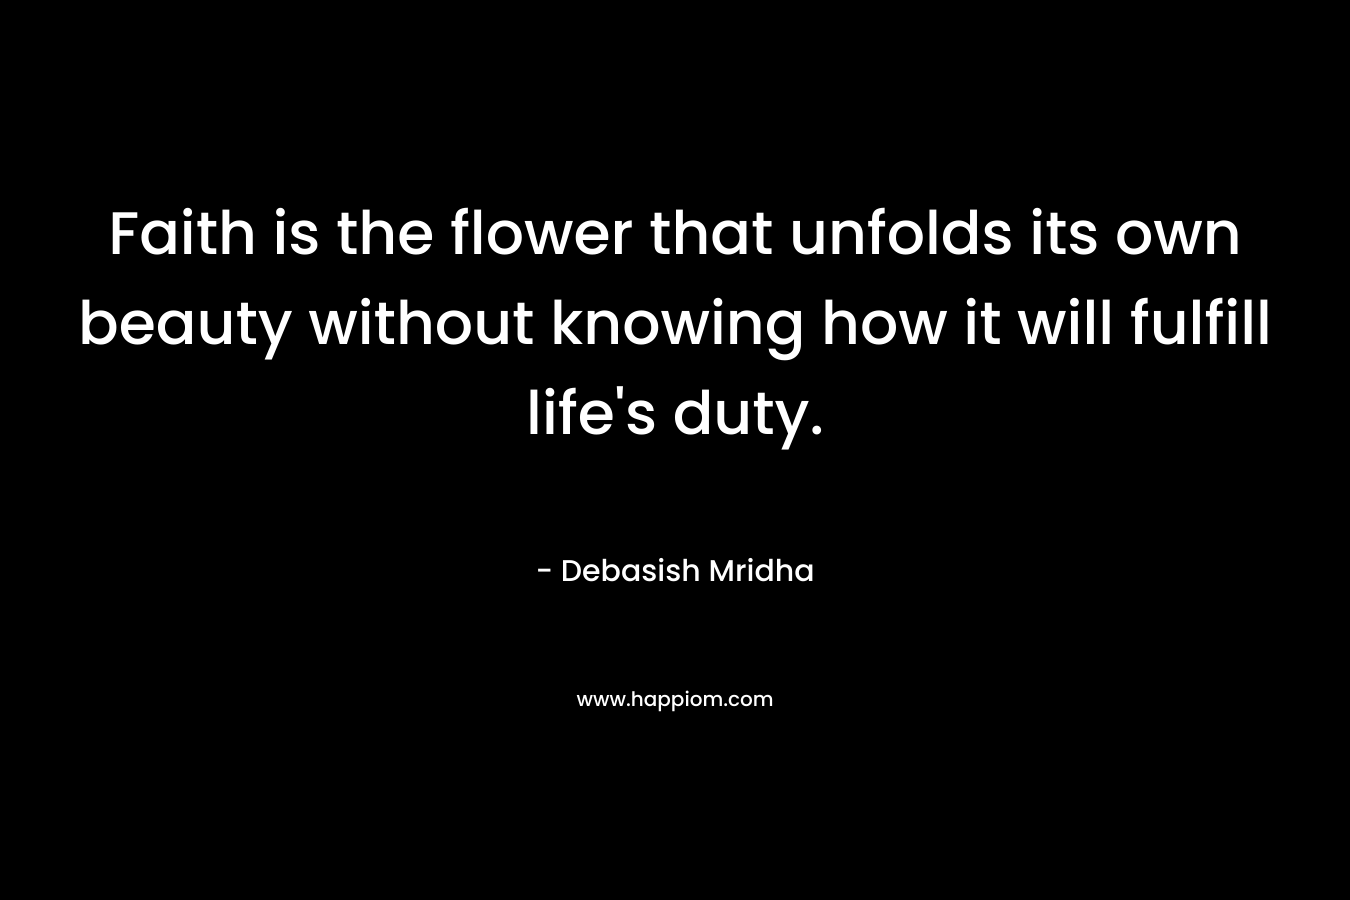 Faith is the flower that unfolds its own beauty without knowing how it will fulfill life’s duty. – Debasish Mridha